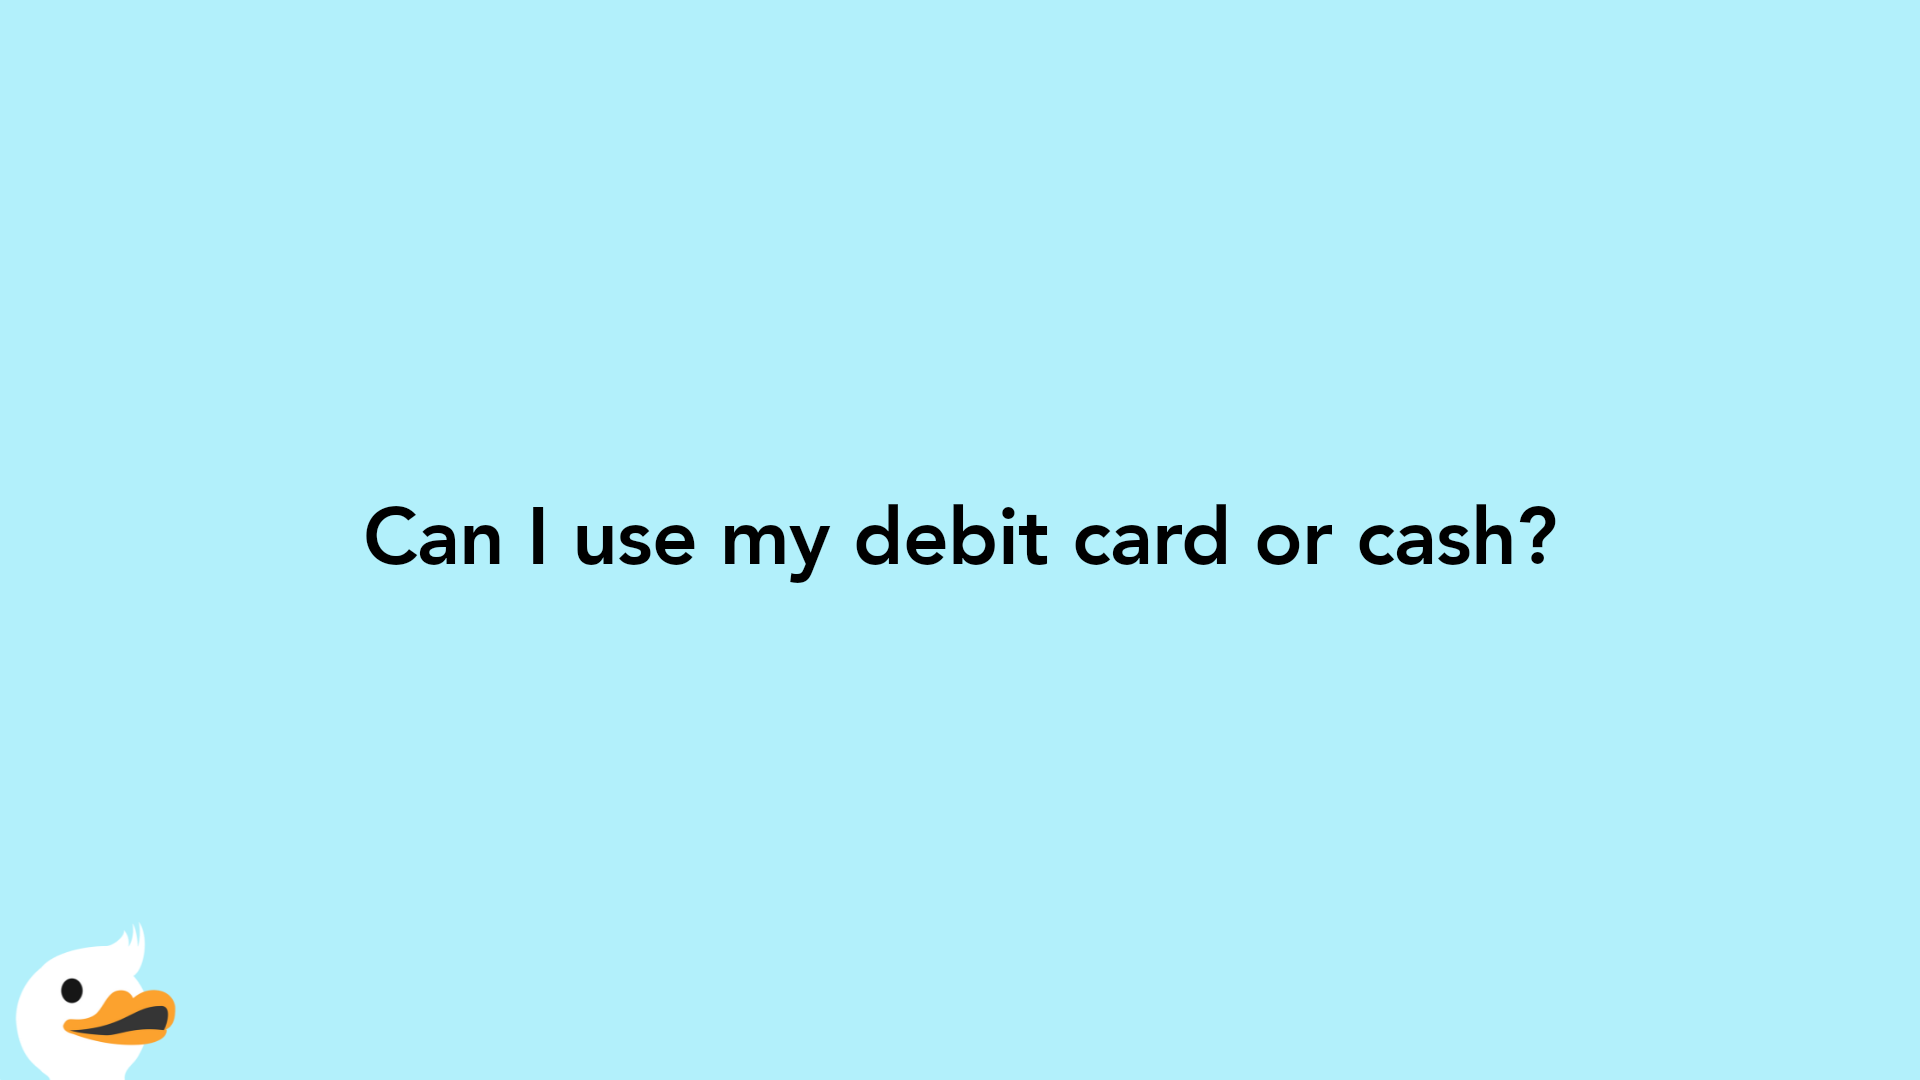 Can I use my debit card or cash?